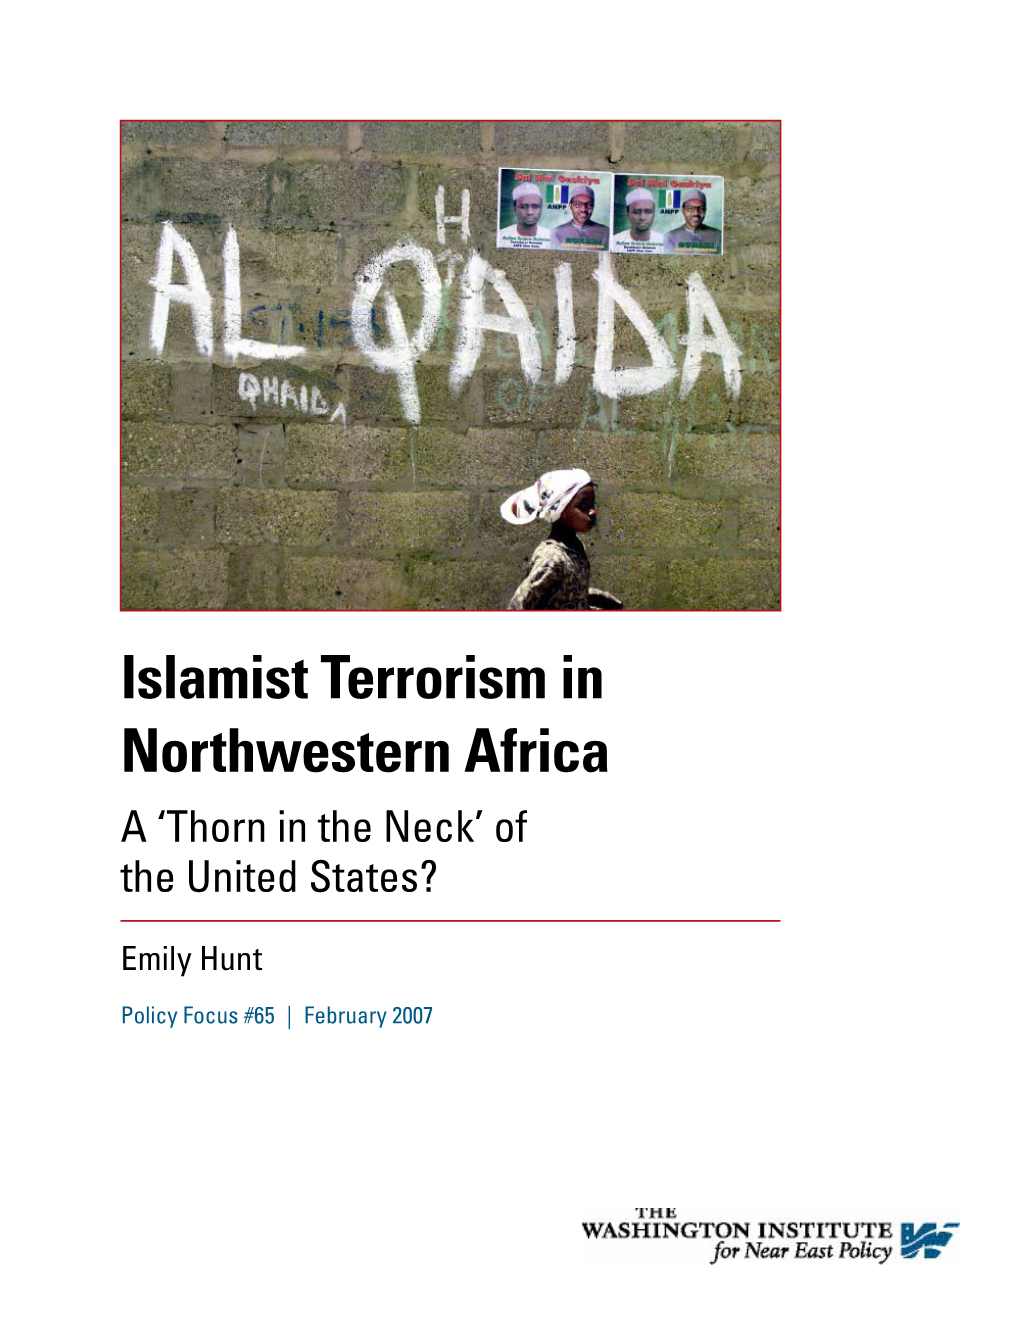 Islamist Terrorism in Northwestern Africa a ‘Thorn in the Neck’ of the United States?